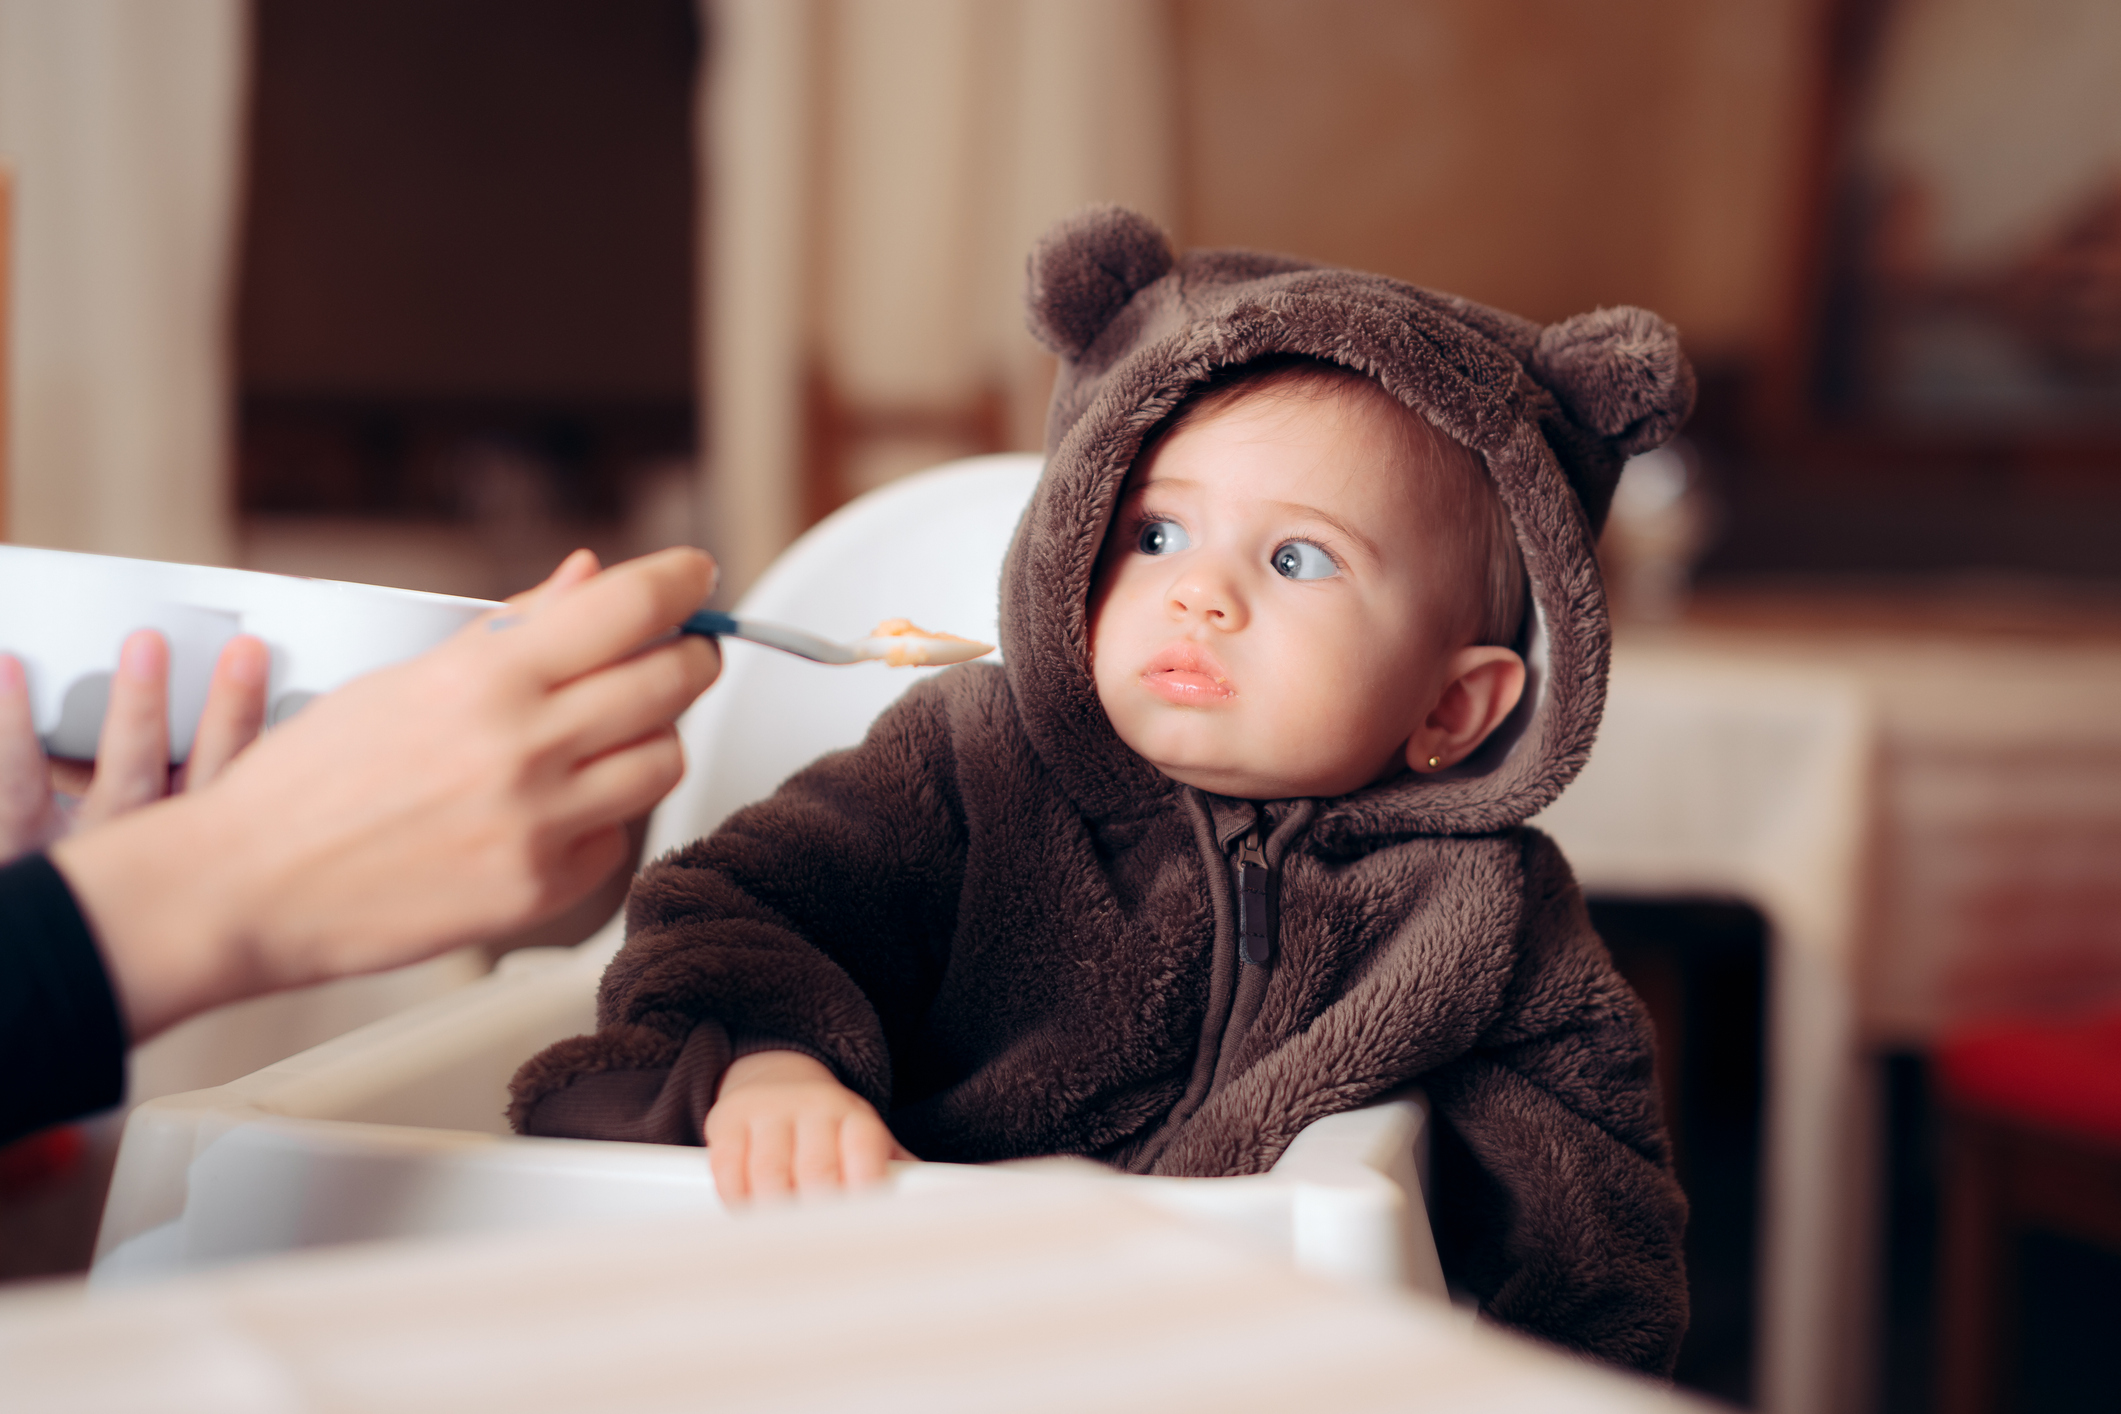 A baby in a bear onesie leans away from the spoon